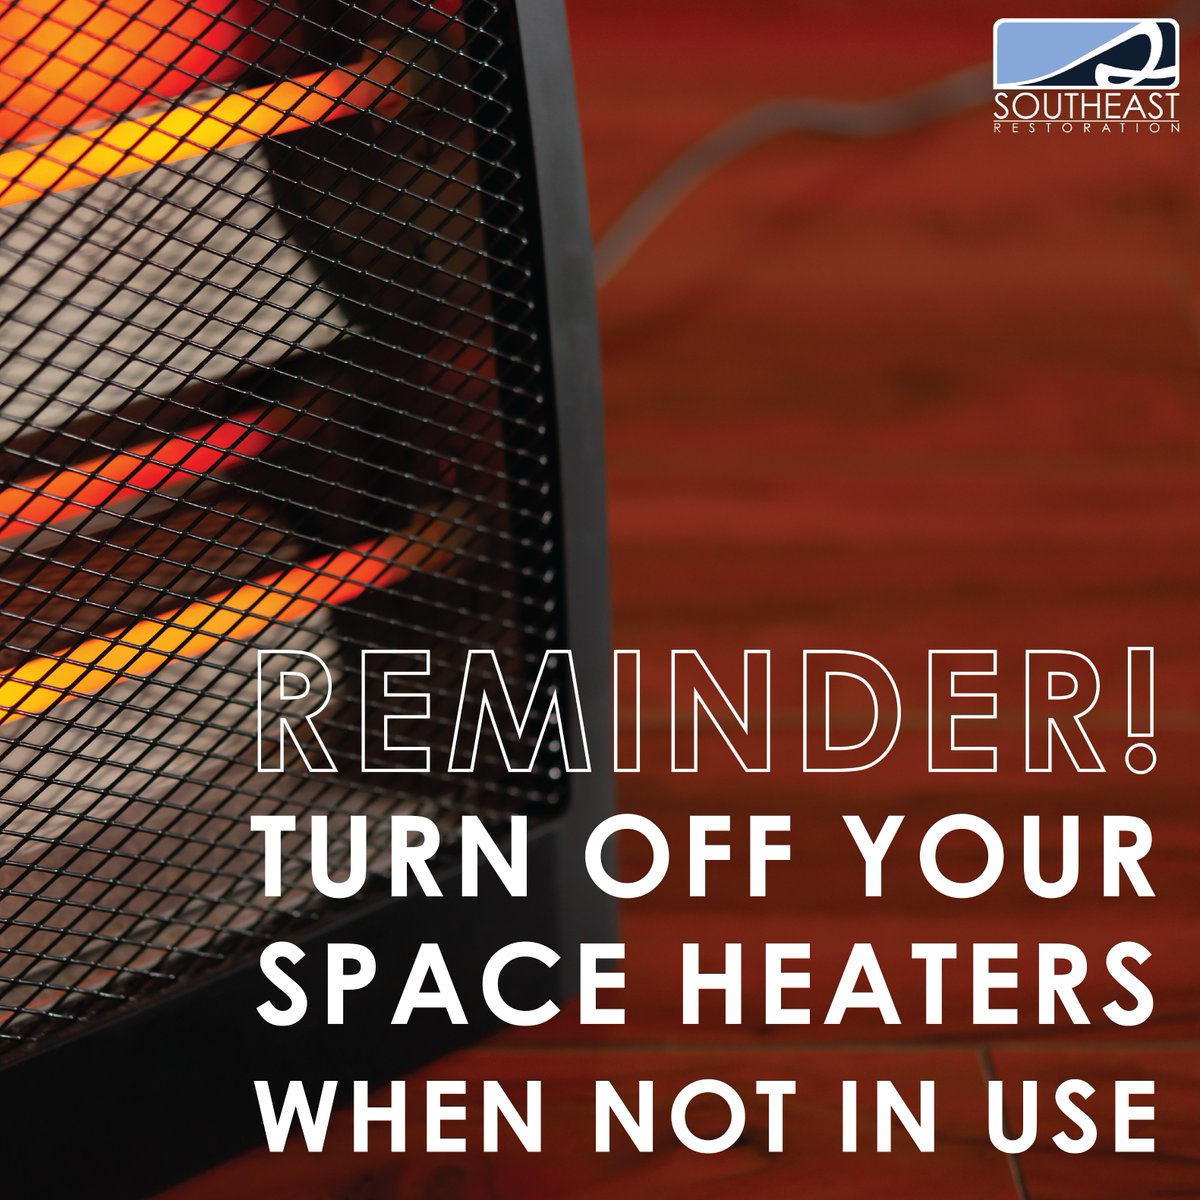 Space heaters draw a lot of energy and can get hotter than you might think. When left alone for extended periods, they can cause objects to melt and even start a fire. Ensure your home is safe by turning them off after each use.

#fireawareness #homeprotection